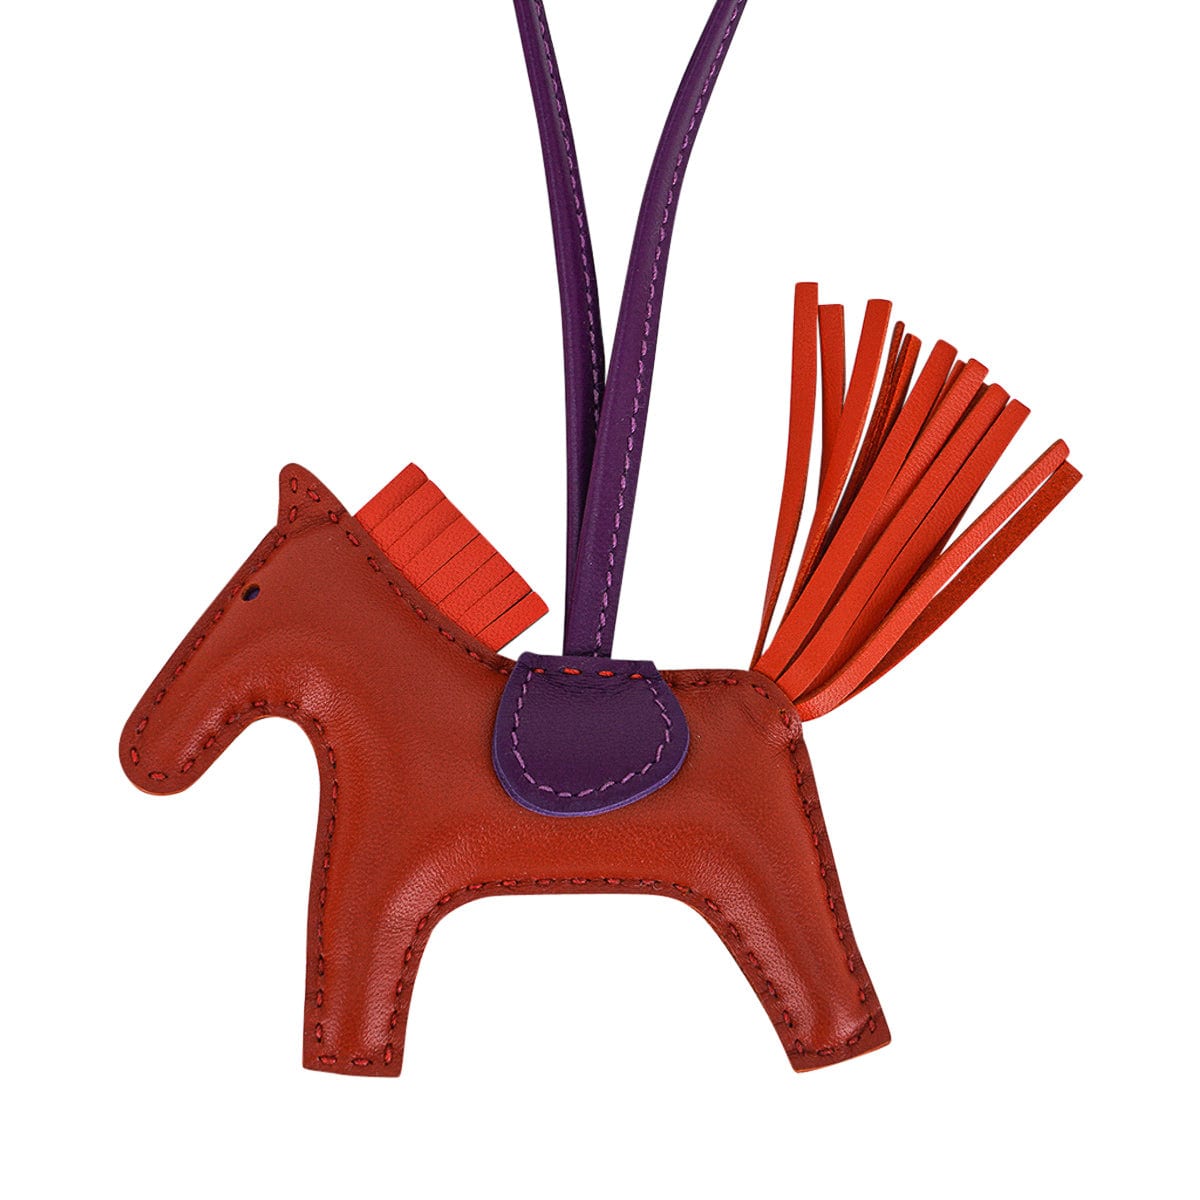 Hermes Rodeo Charm